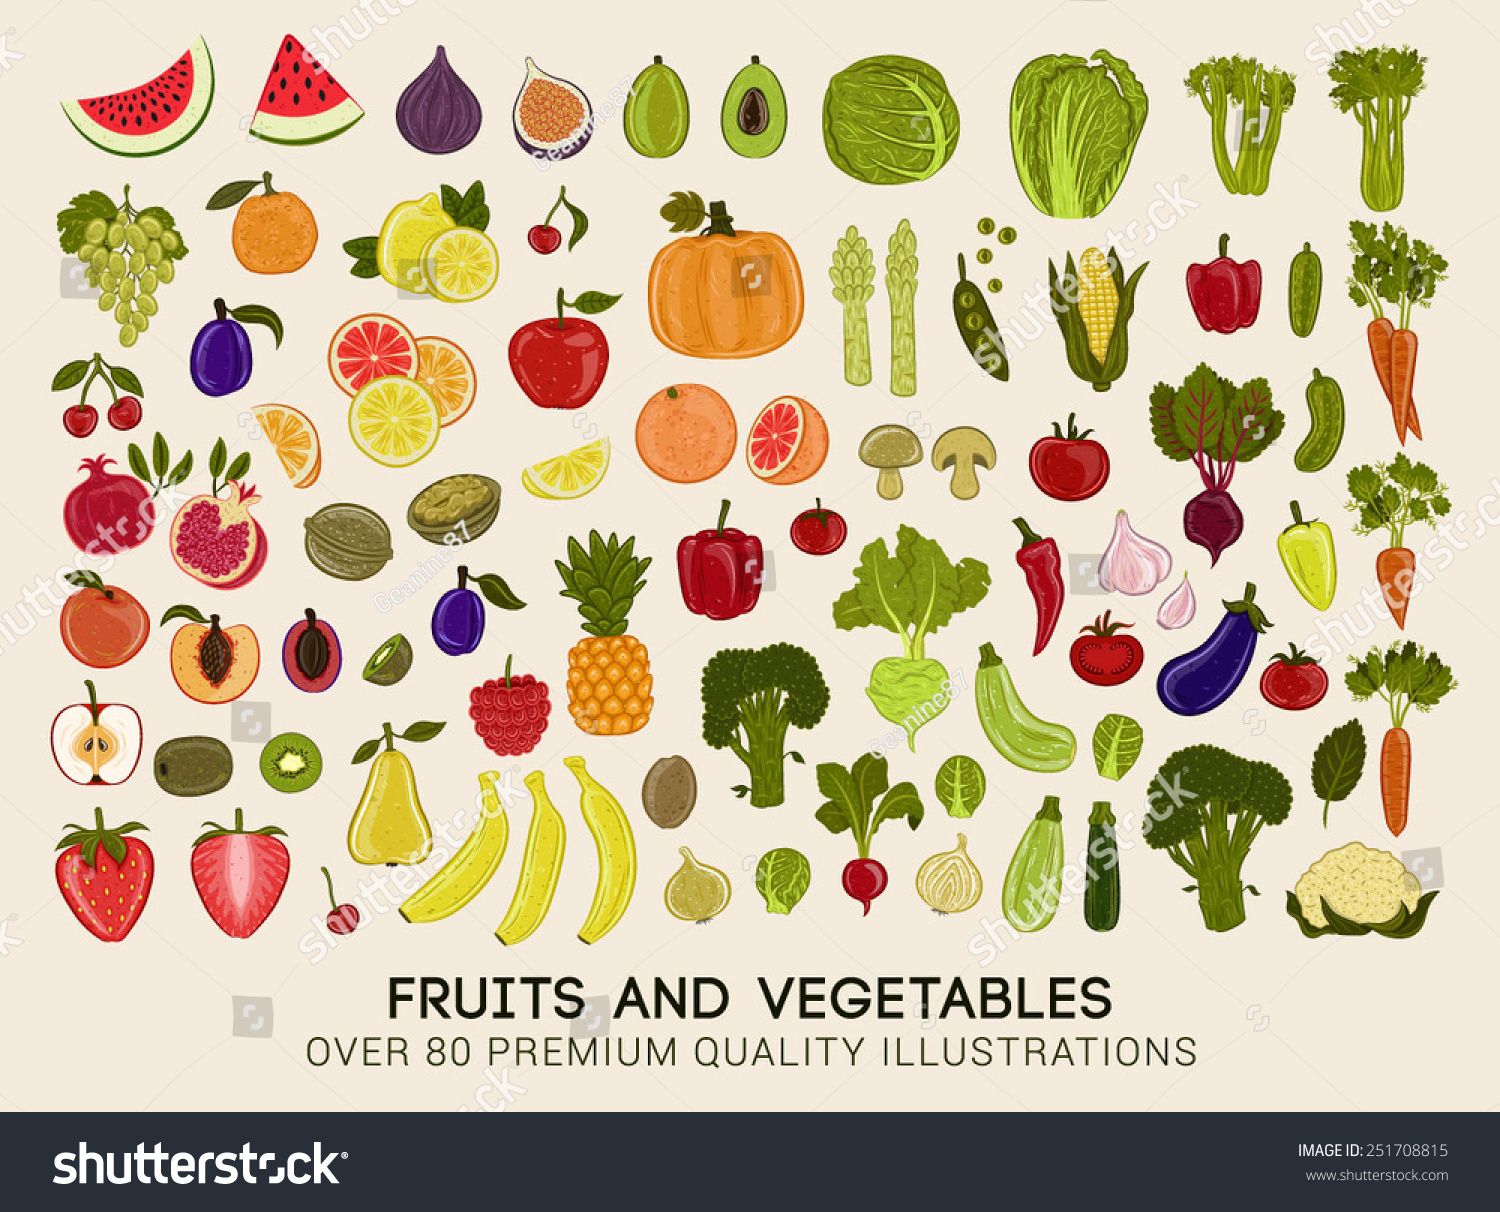 Mega collection of premium quality vector illustrations of fruits and vegetables #251708815